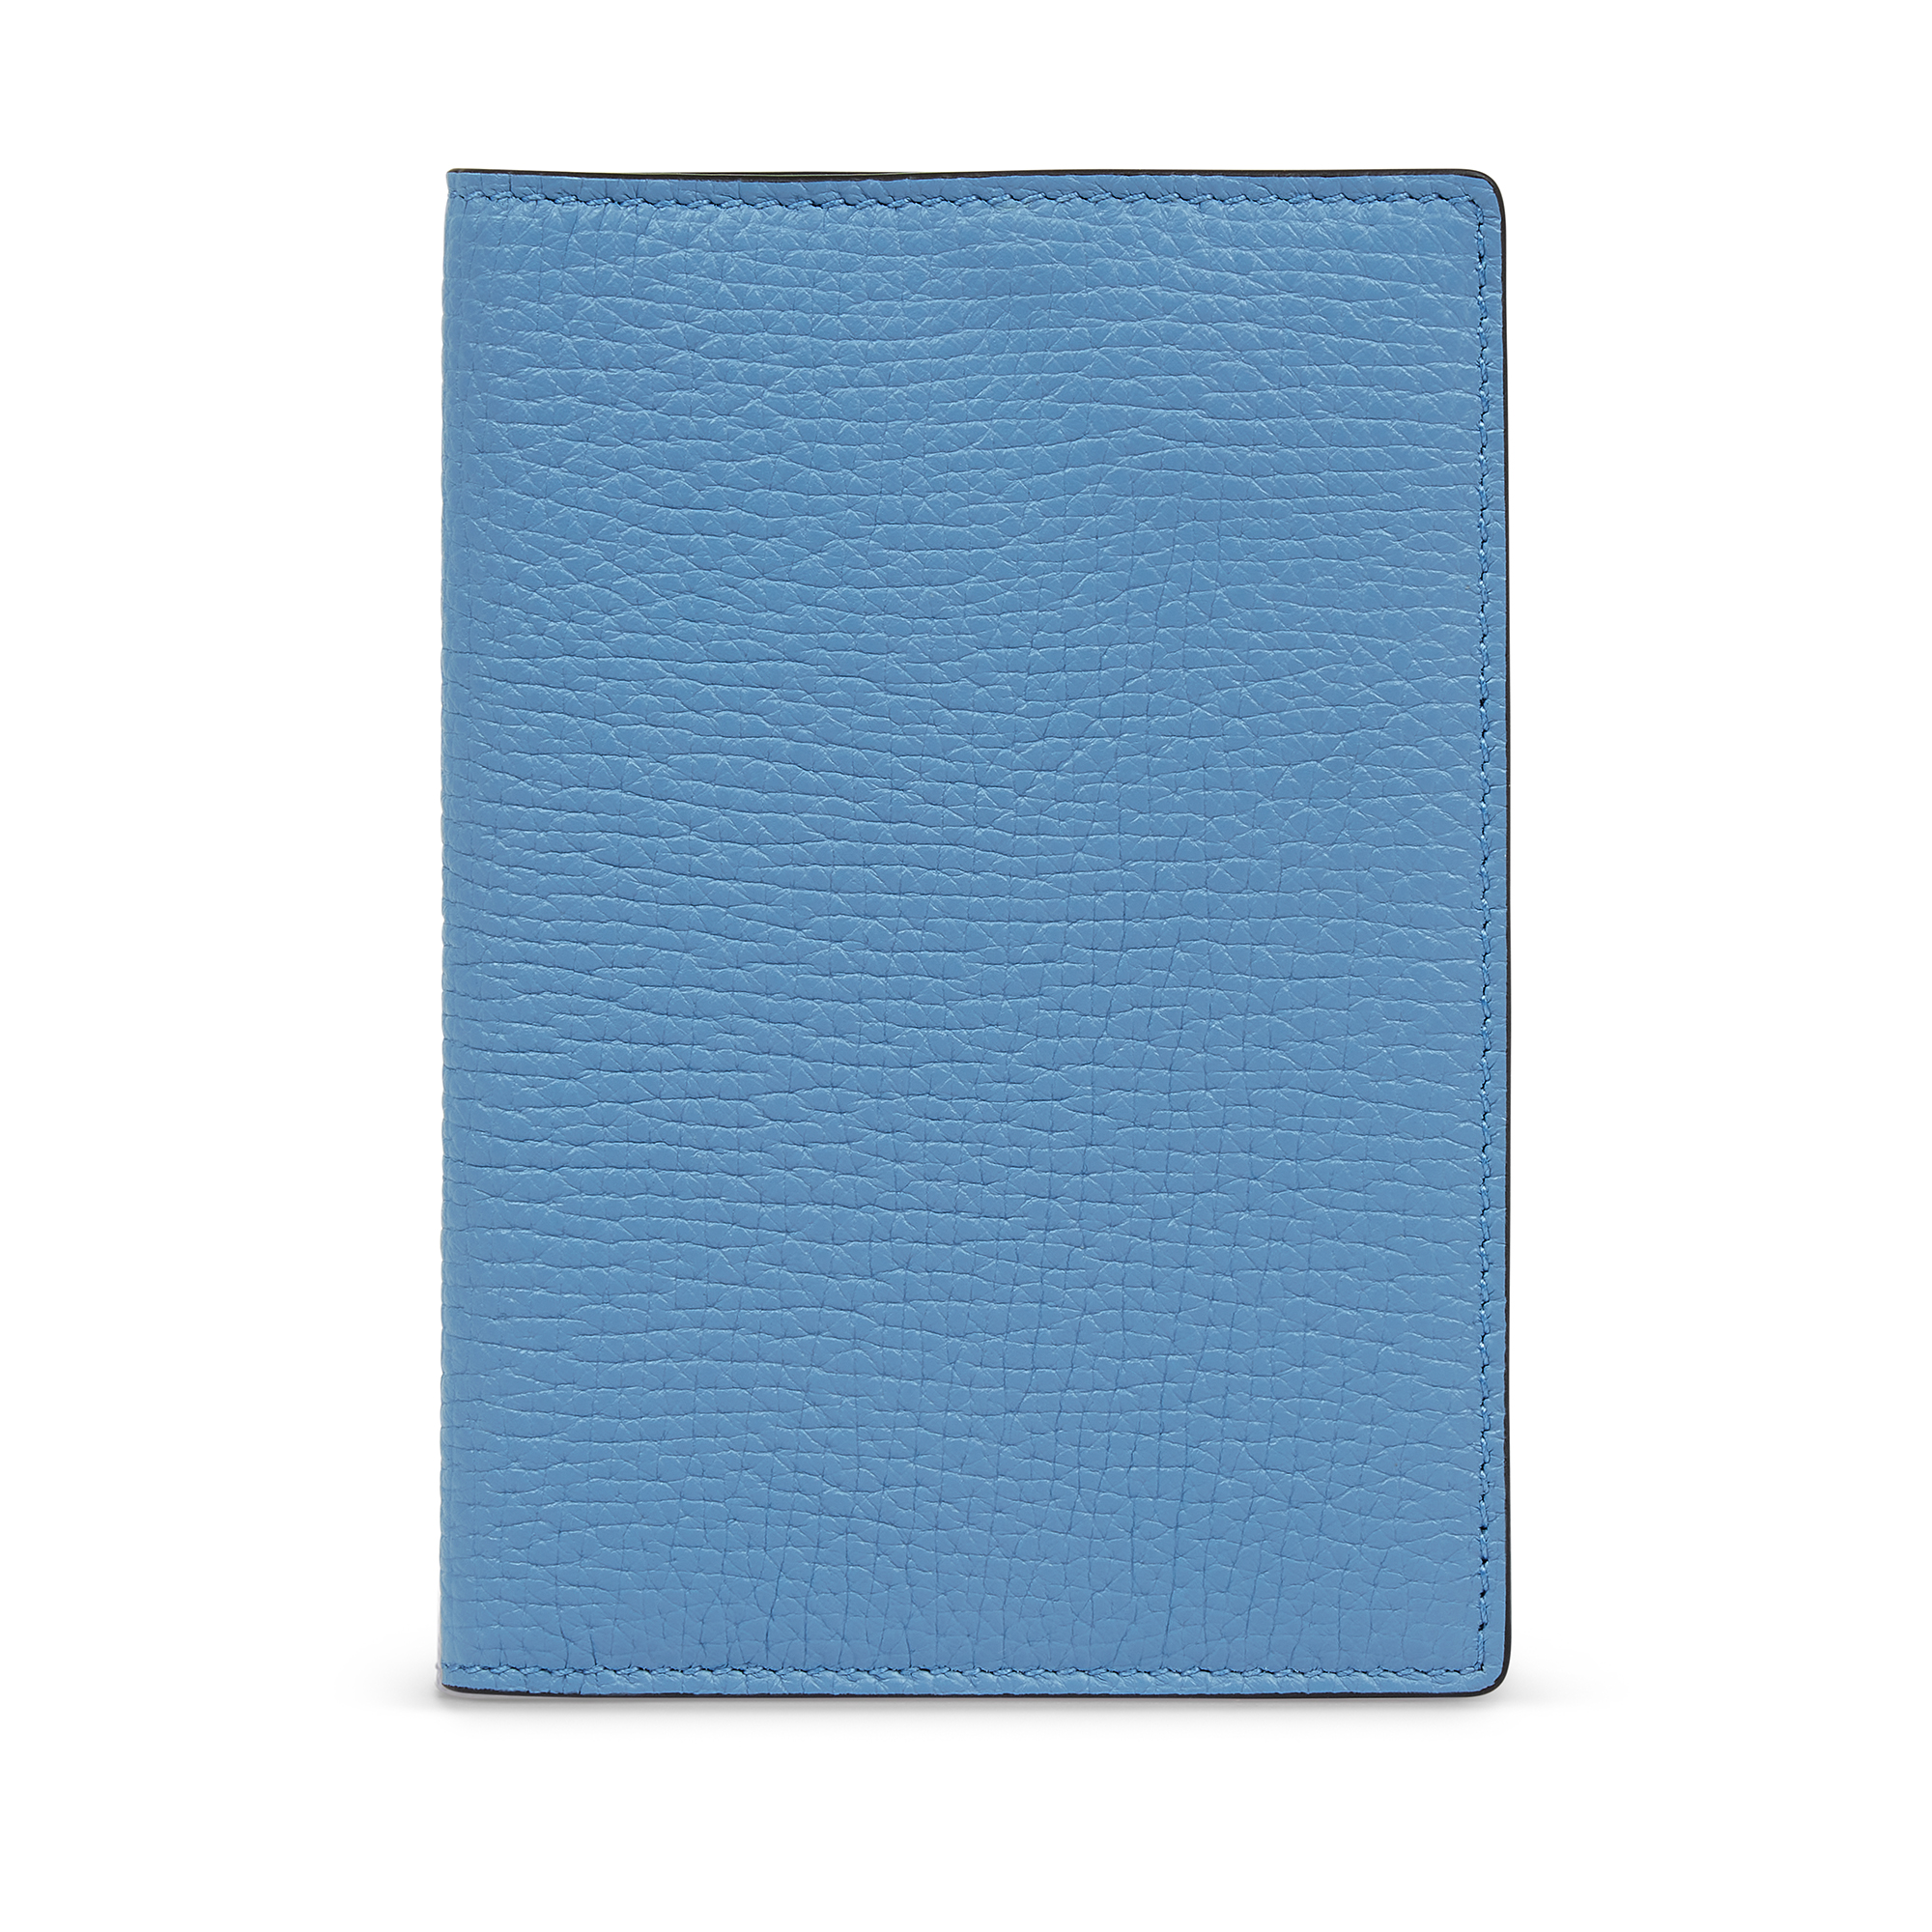 Smythson Passport Cover In Ludlow In Nile Blue